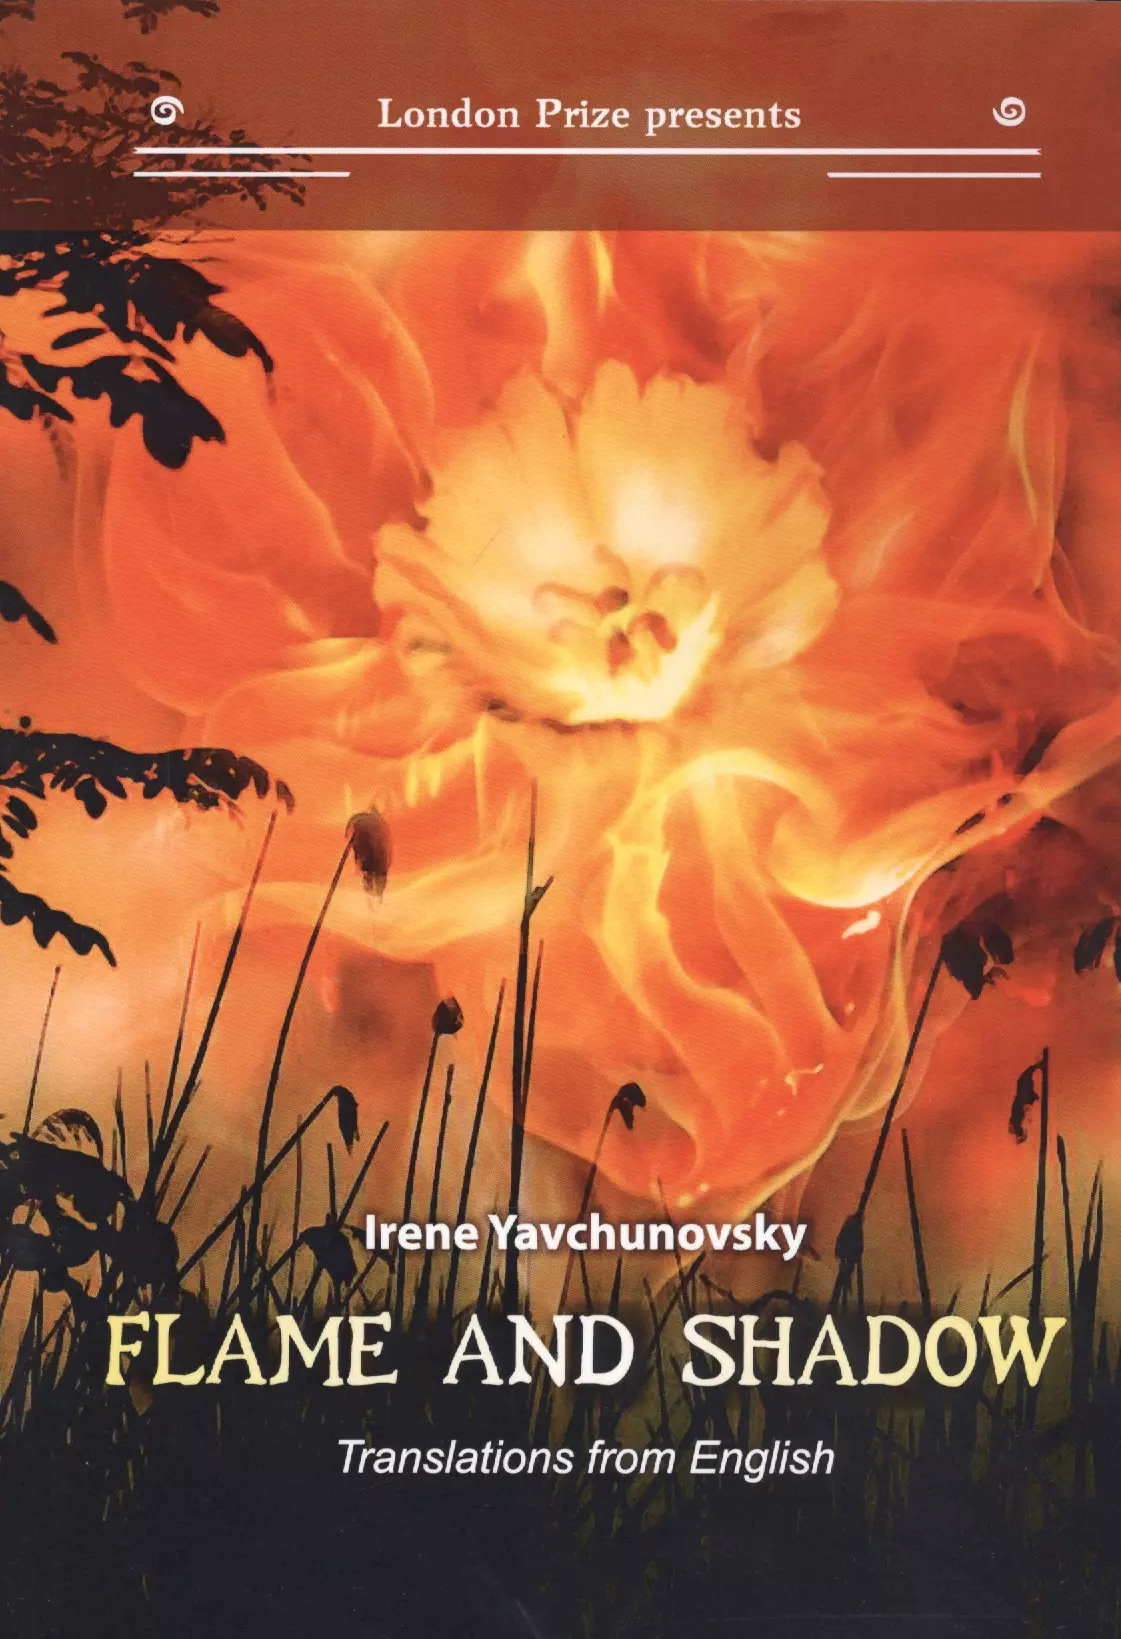  - Flame and shadow